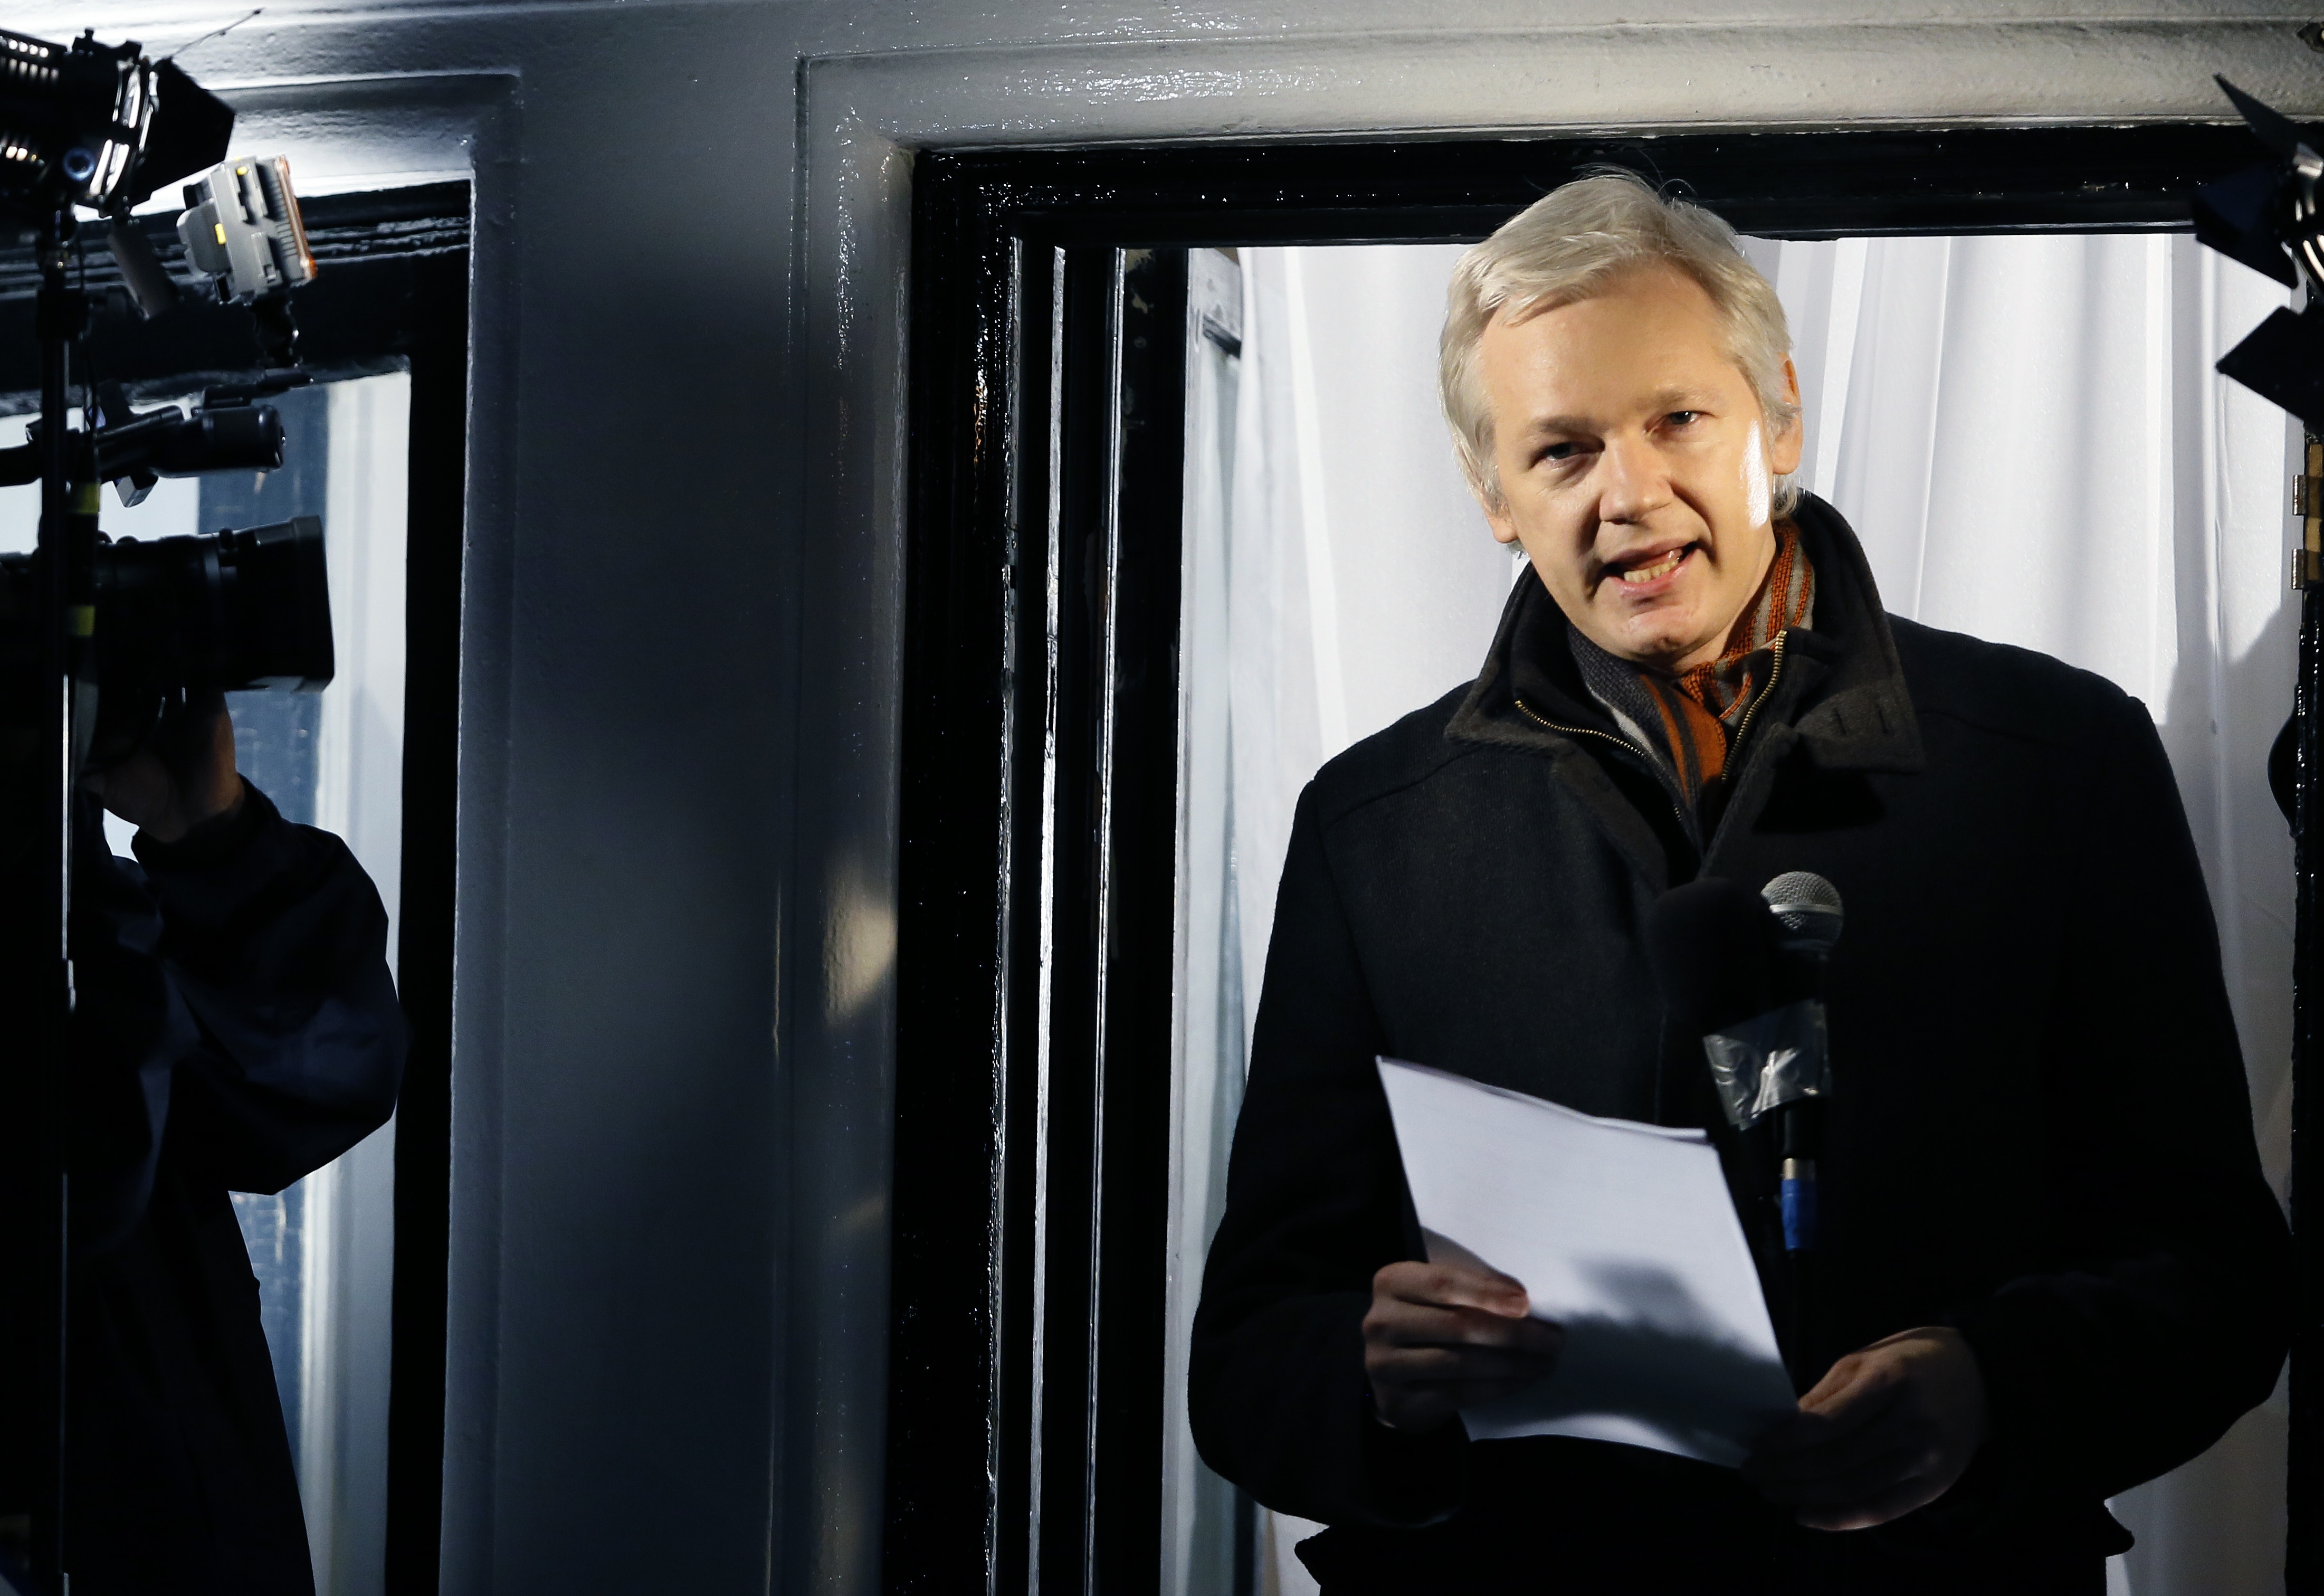 FILE - In this Thursday, Dec. 20, 2012, file photo, Julian Assange, founder of WikiLeaks speaks to the media and members of the public from a balcony at the Ecuadorian Embassy in London. British police have removed the officers standing watch over Julian Assange outside the Ecuadorean Embassy in London, but say they will still do their best to arrest the WikiLeaks founder who has been holed up there since June 2012. London's Metropolitan Police said in a statement Monday, Oct. 12, 2015, that Assange is still subject to arrest for failing to answer a rape charge in Sweden. (AP Photo/Kirsty Wigglesworth, File)